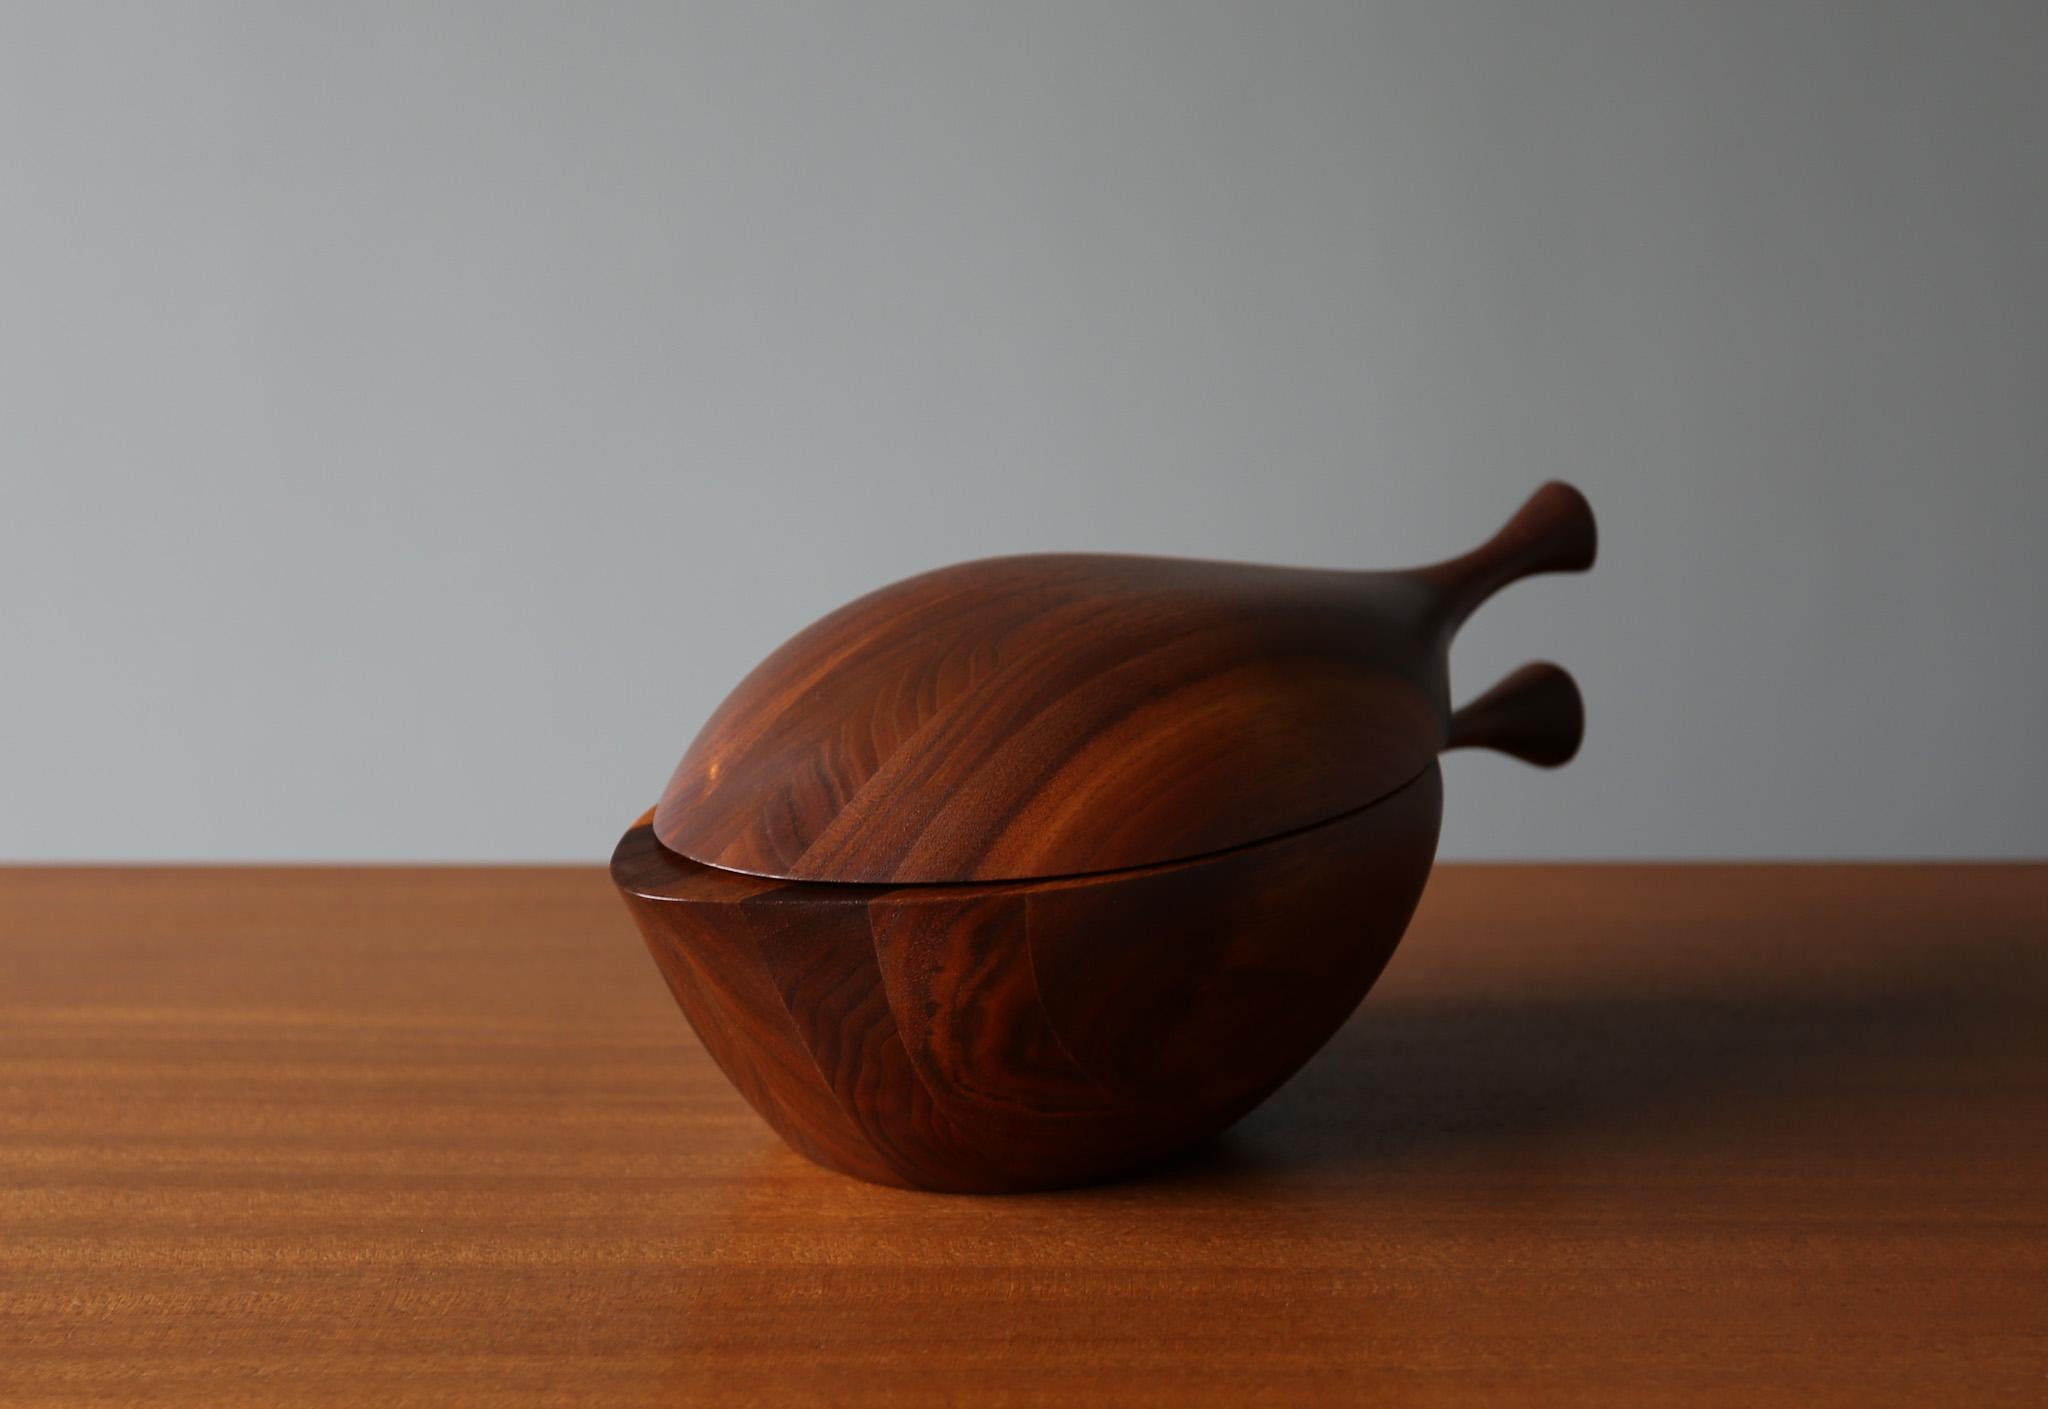 Daniel Loomis Valenza Handcrafted Walnut Covered Bowl,  c.1960 For Sale 5